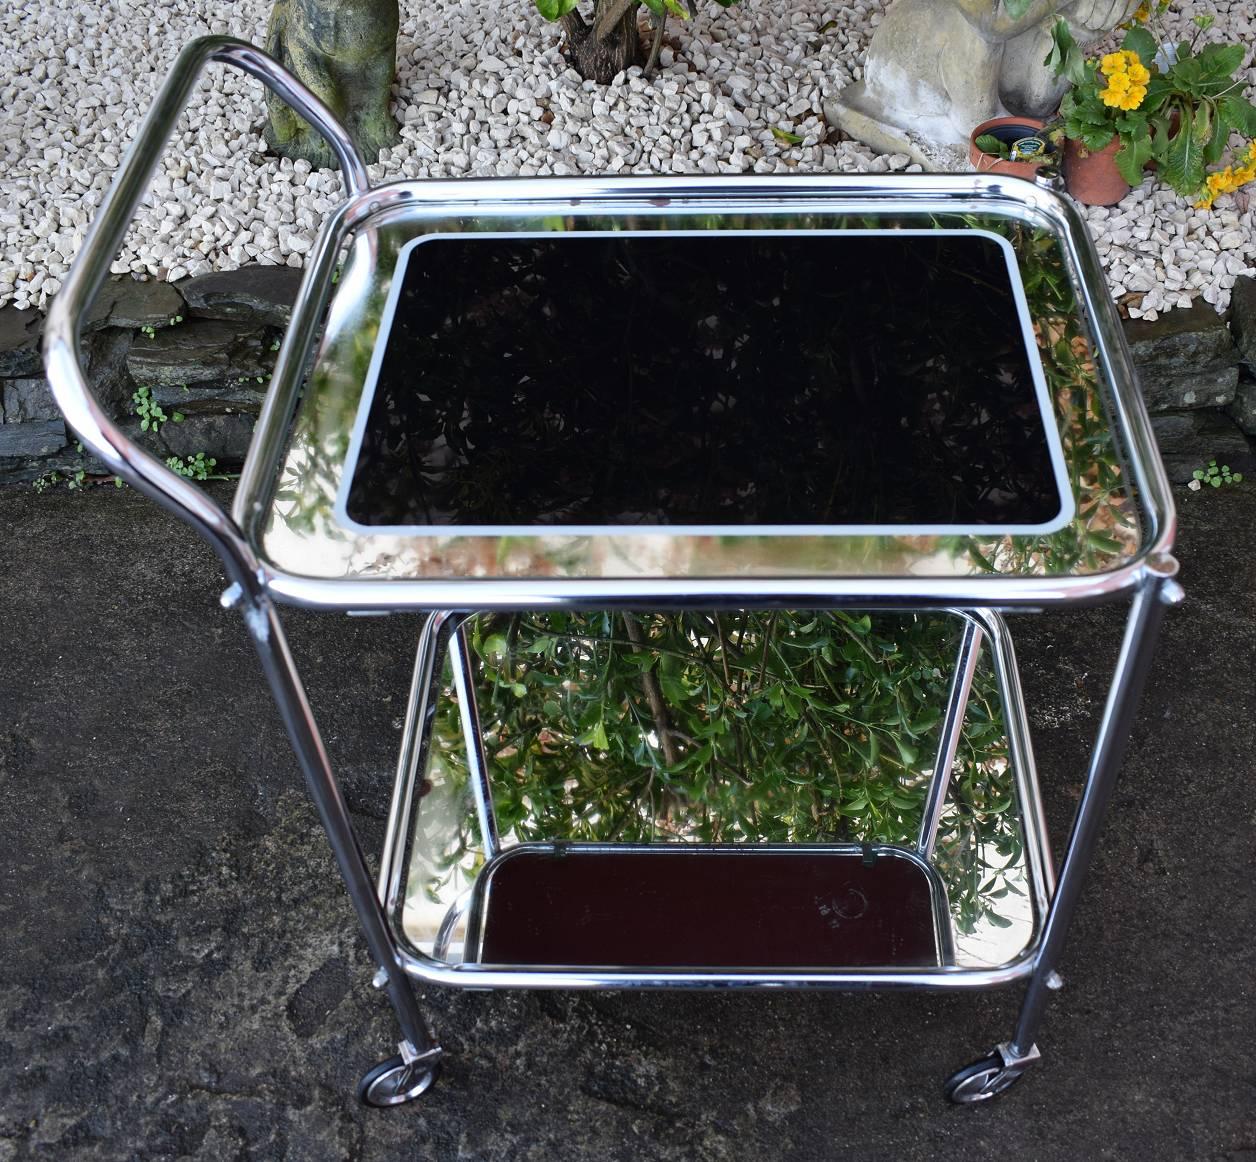 Now this really is a fabulous hostess trolley! Original 1930's Art Deco chrome two-tier trolley, with black and mirrored edged glass, very glam! All totally original and in great condition. These are fab for displaying cocktail shakers, glass and